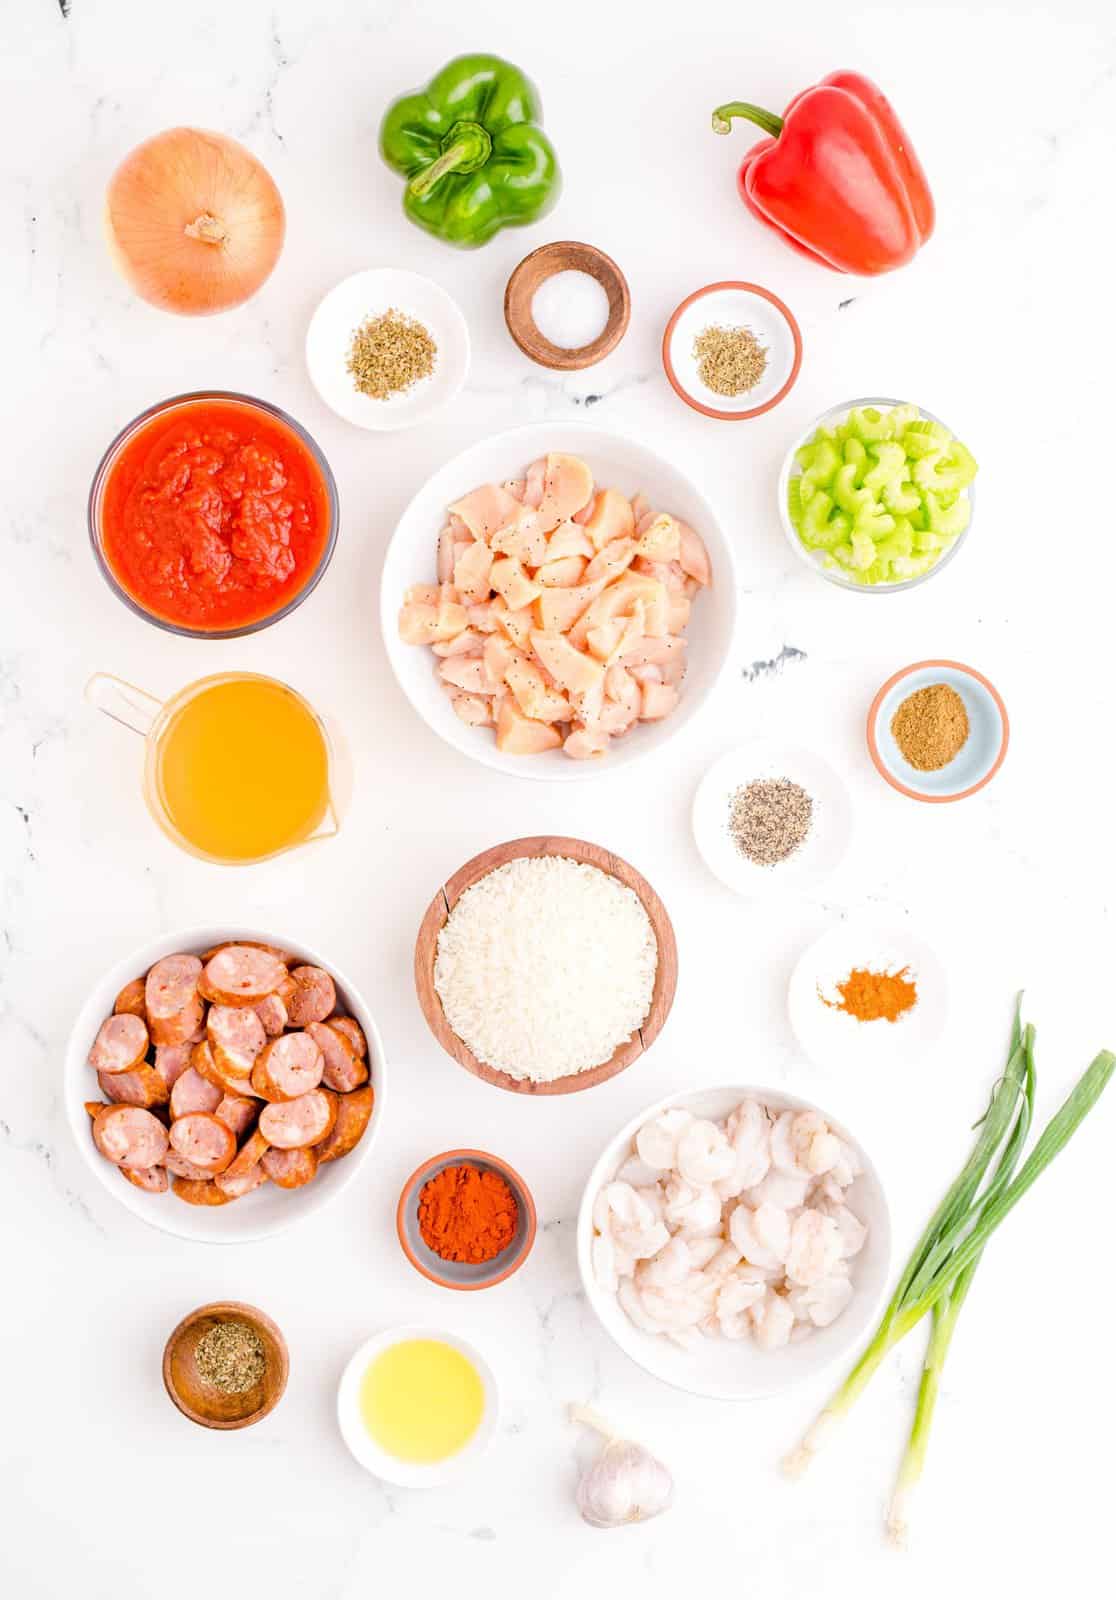 Ingredients needed: cooking oil, andouille sausage, chicken, onion, green bell pepper, red bell pepper, celery, garlic, crushed tomatoes, smoked paprika, salt, cumin, oregano, basil, thyme, pepper, cayenne pepper white rice, chicken broth, shrimp and green onions.